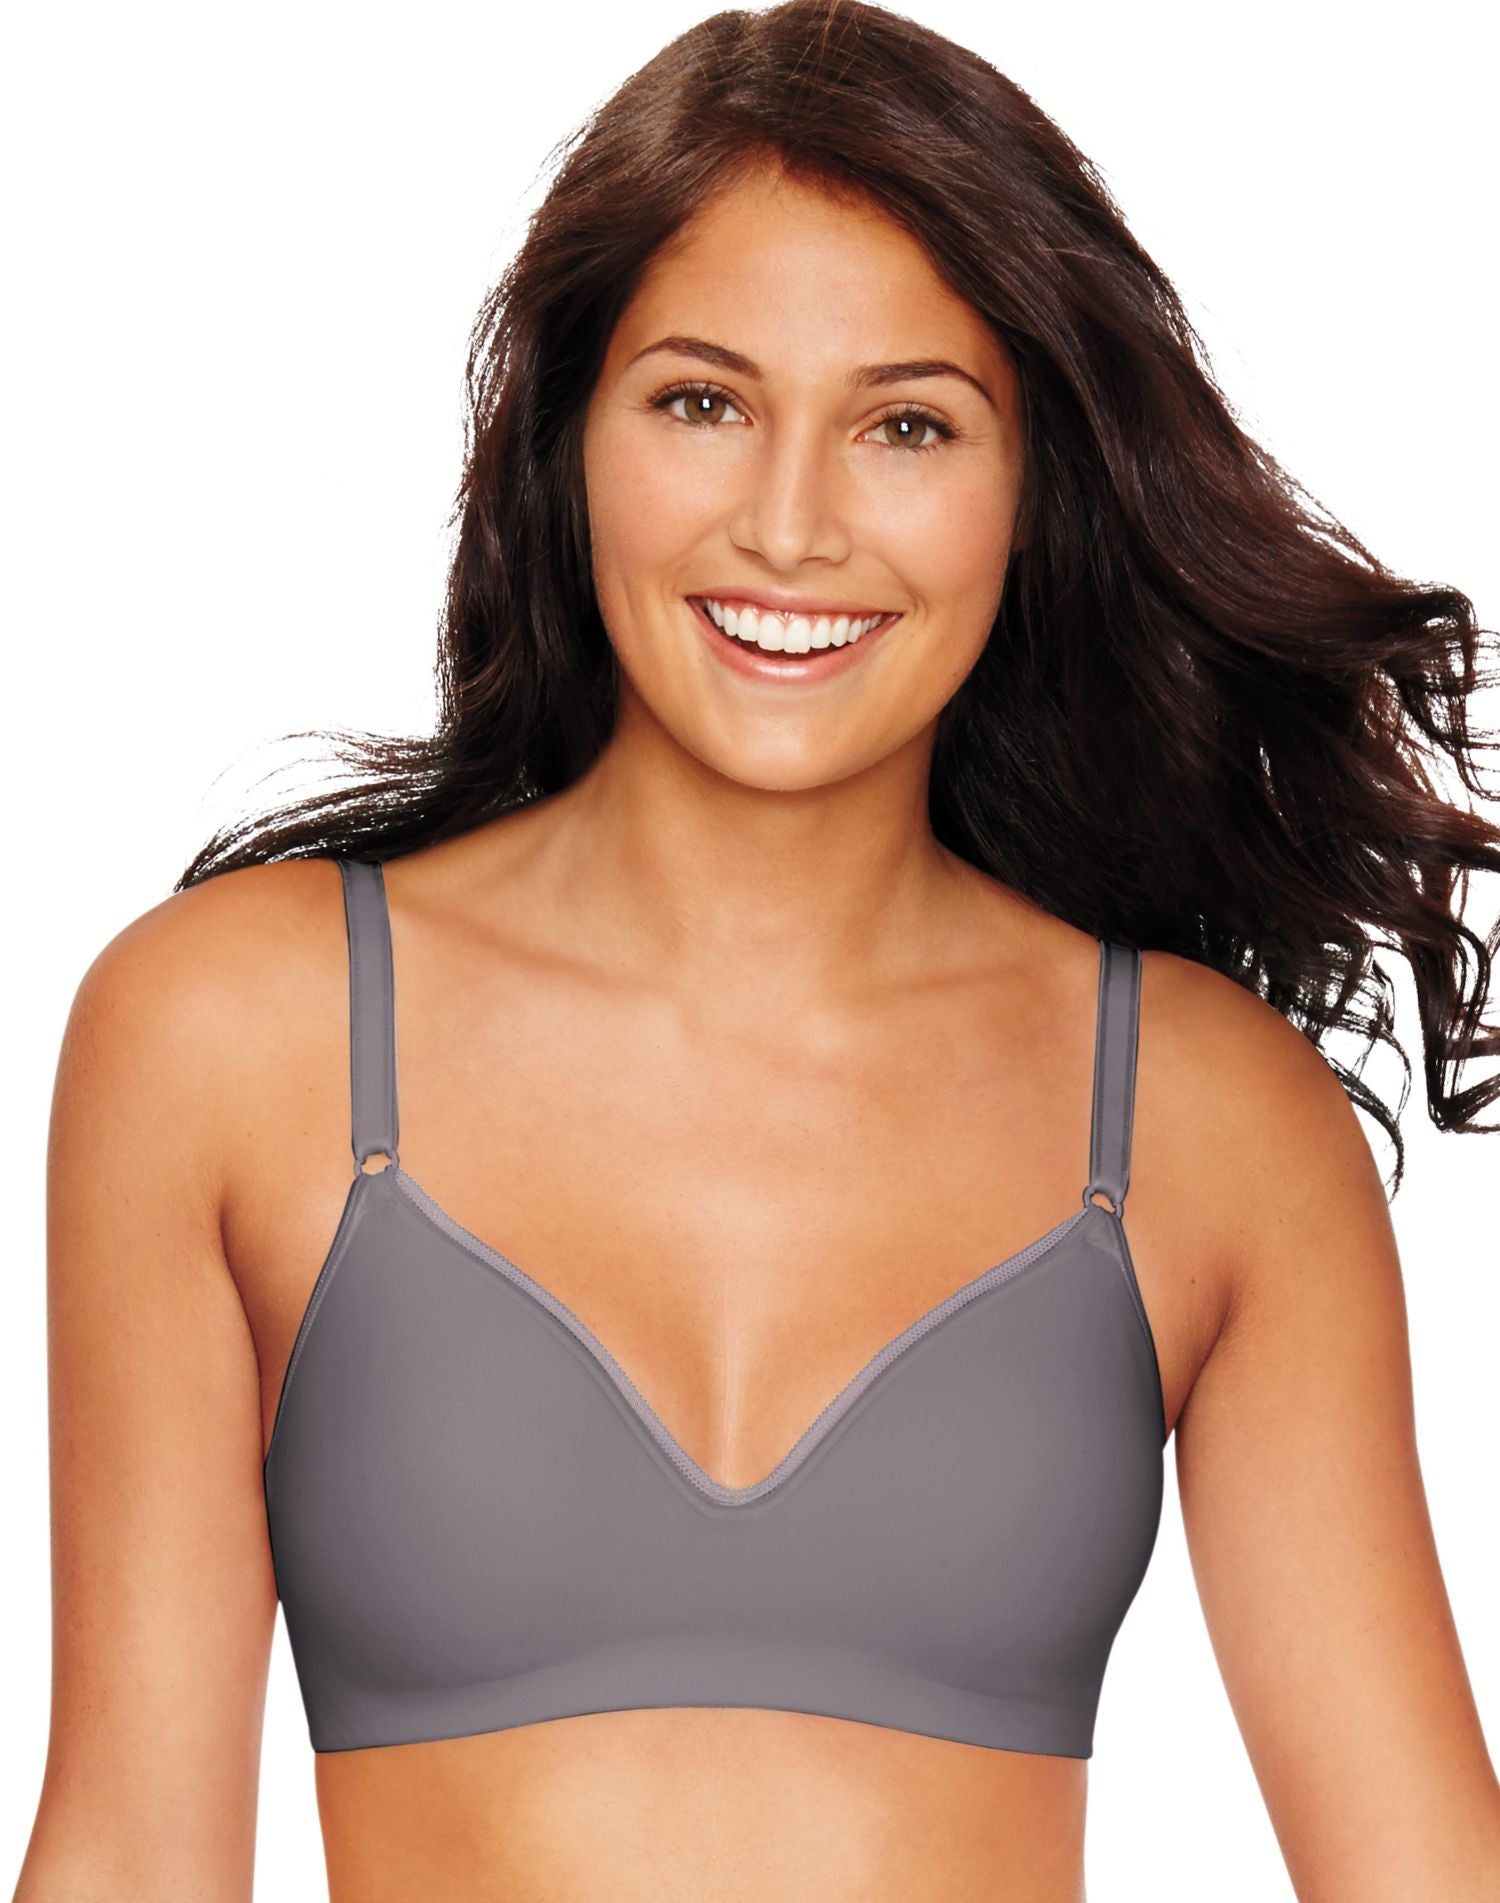 HU05 - Hanes Ultimate Smooth Inside and Out Foam Women`s Wirefree Bra